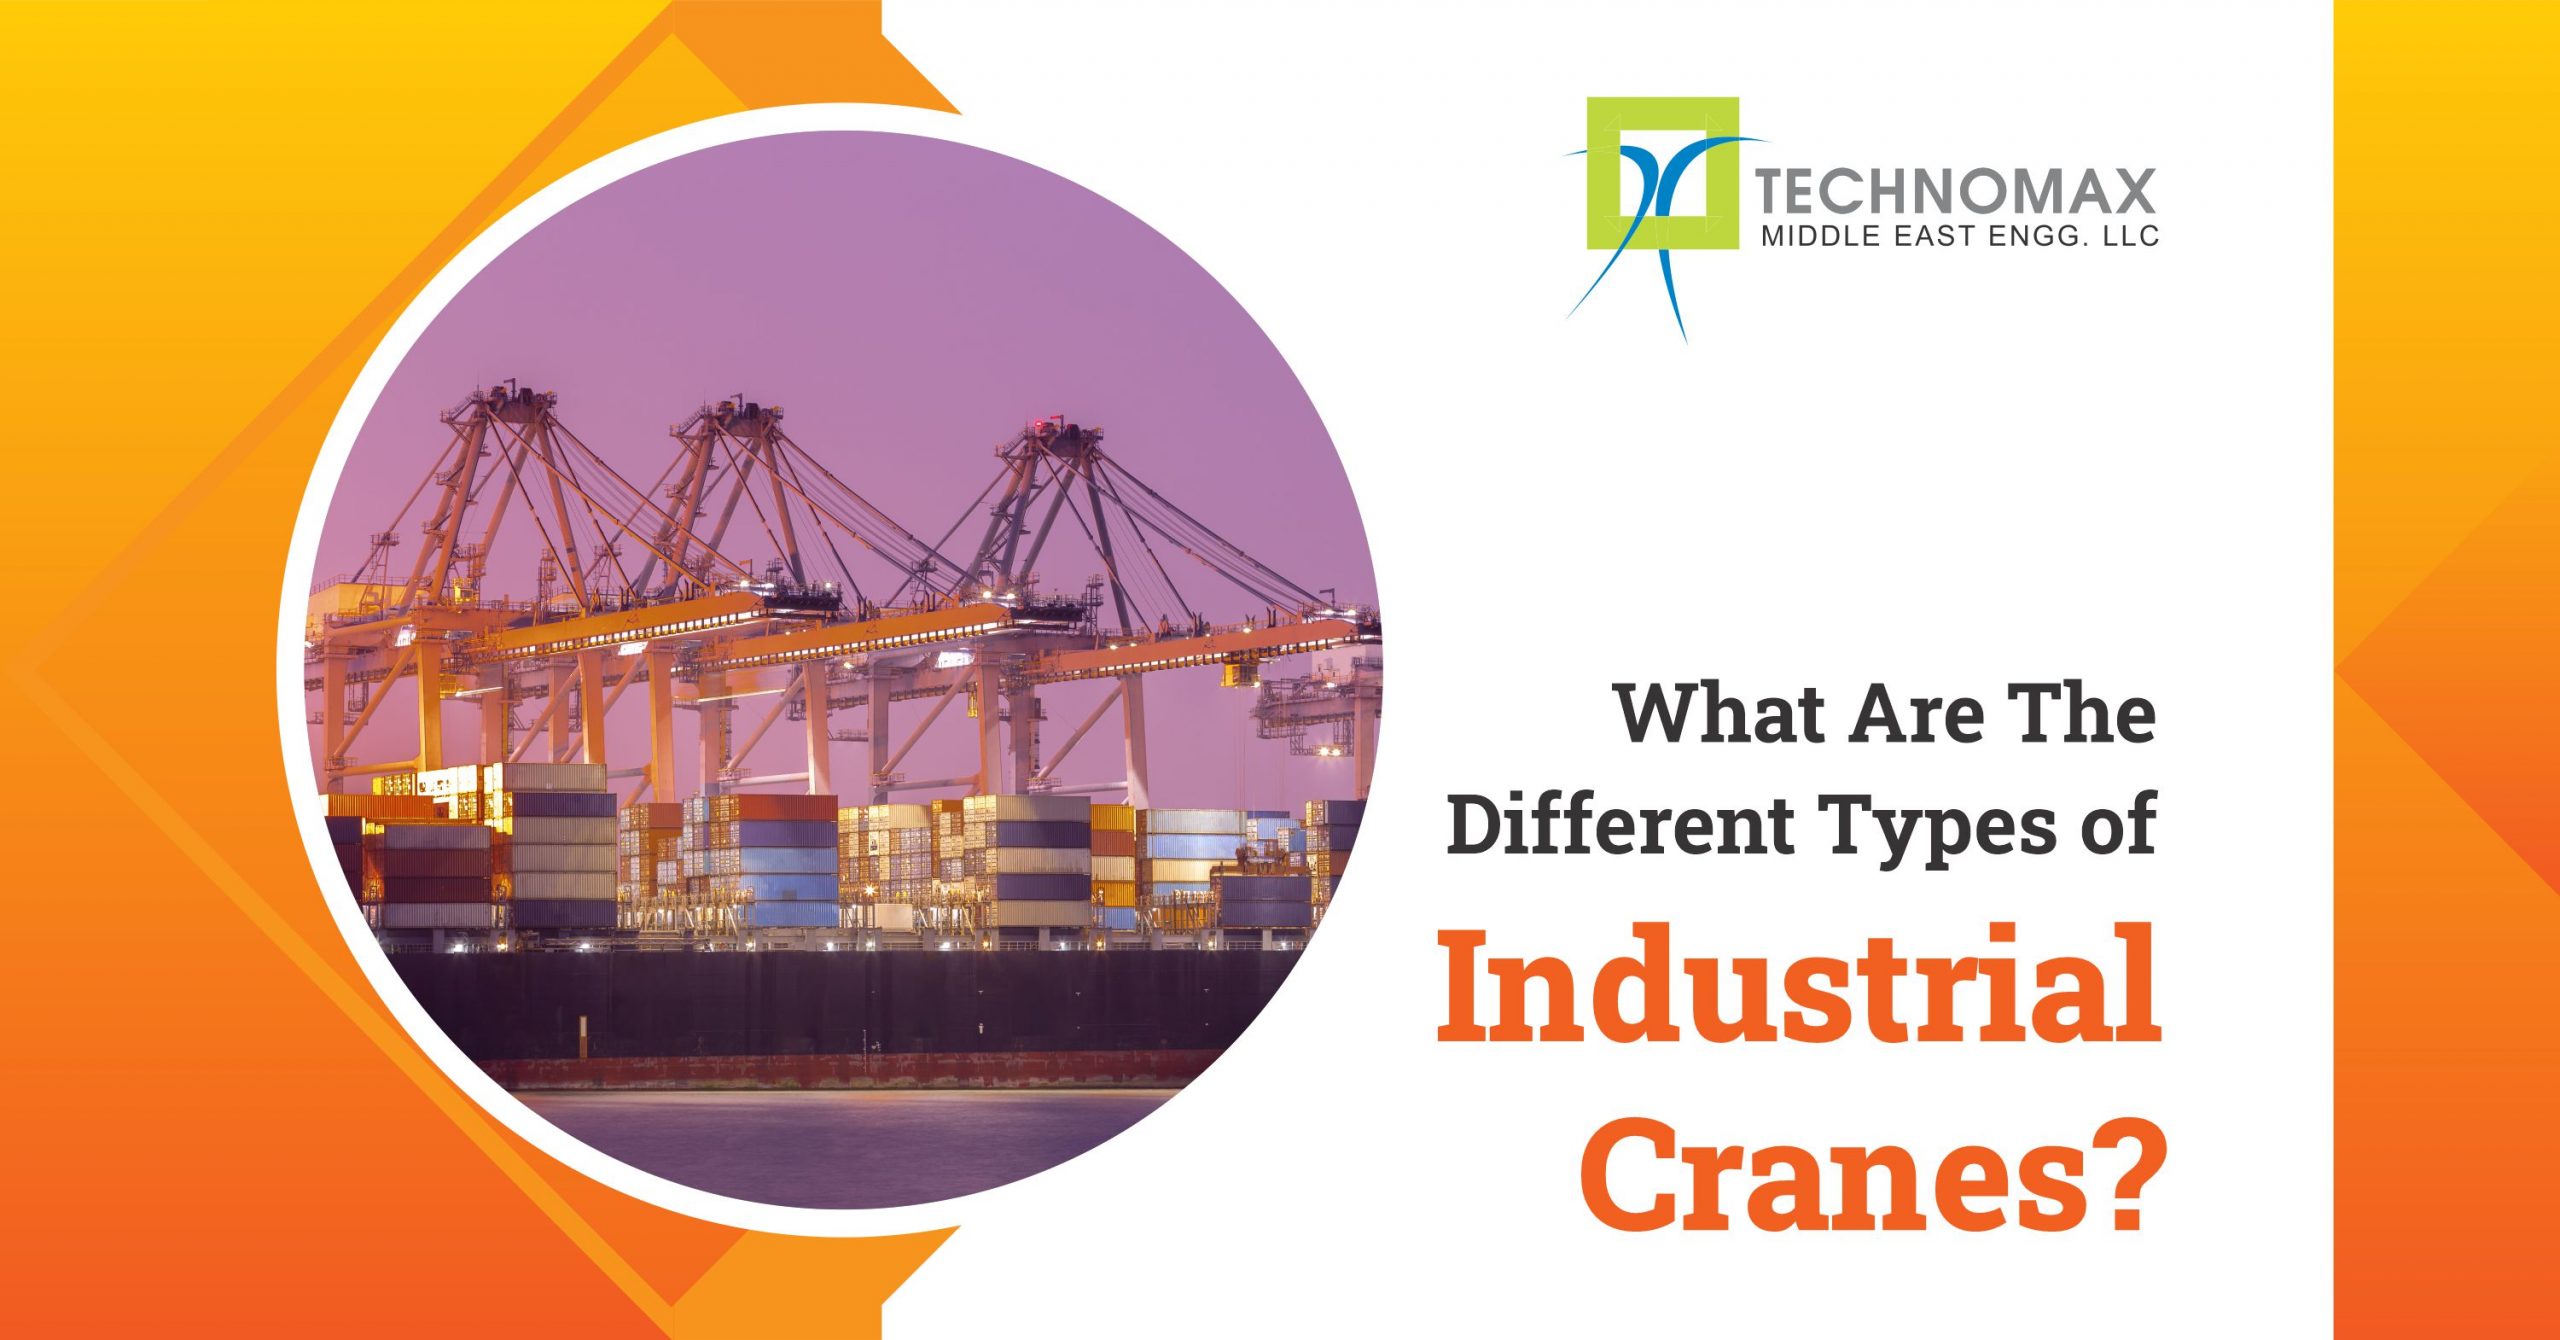 7 Different Types of Industrial Cranes